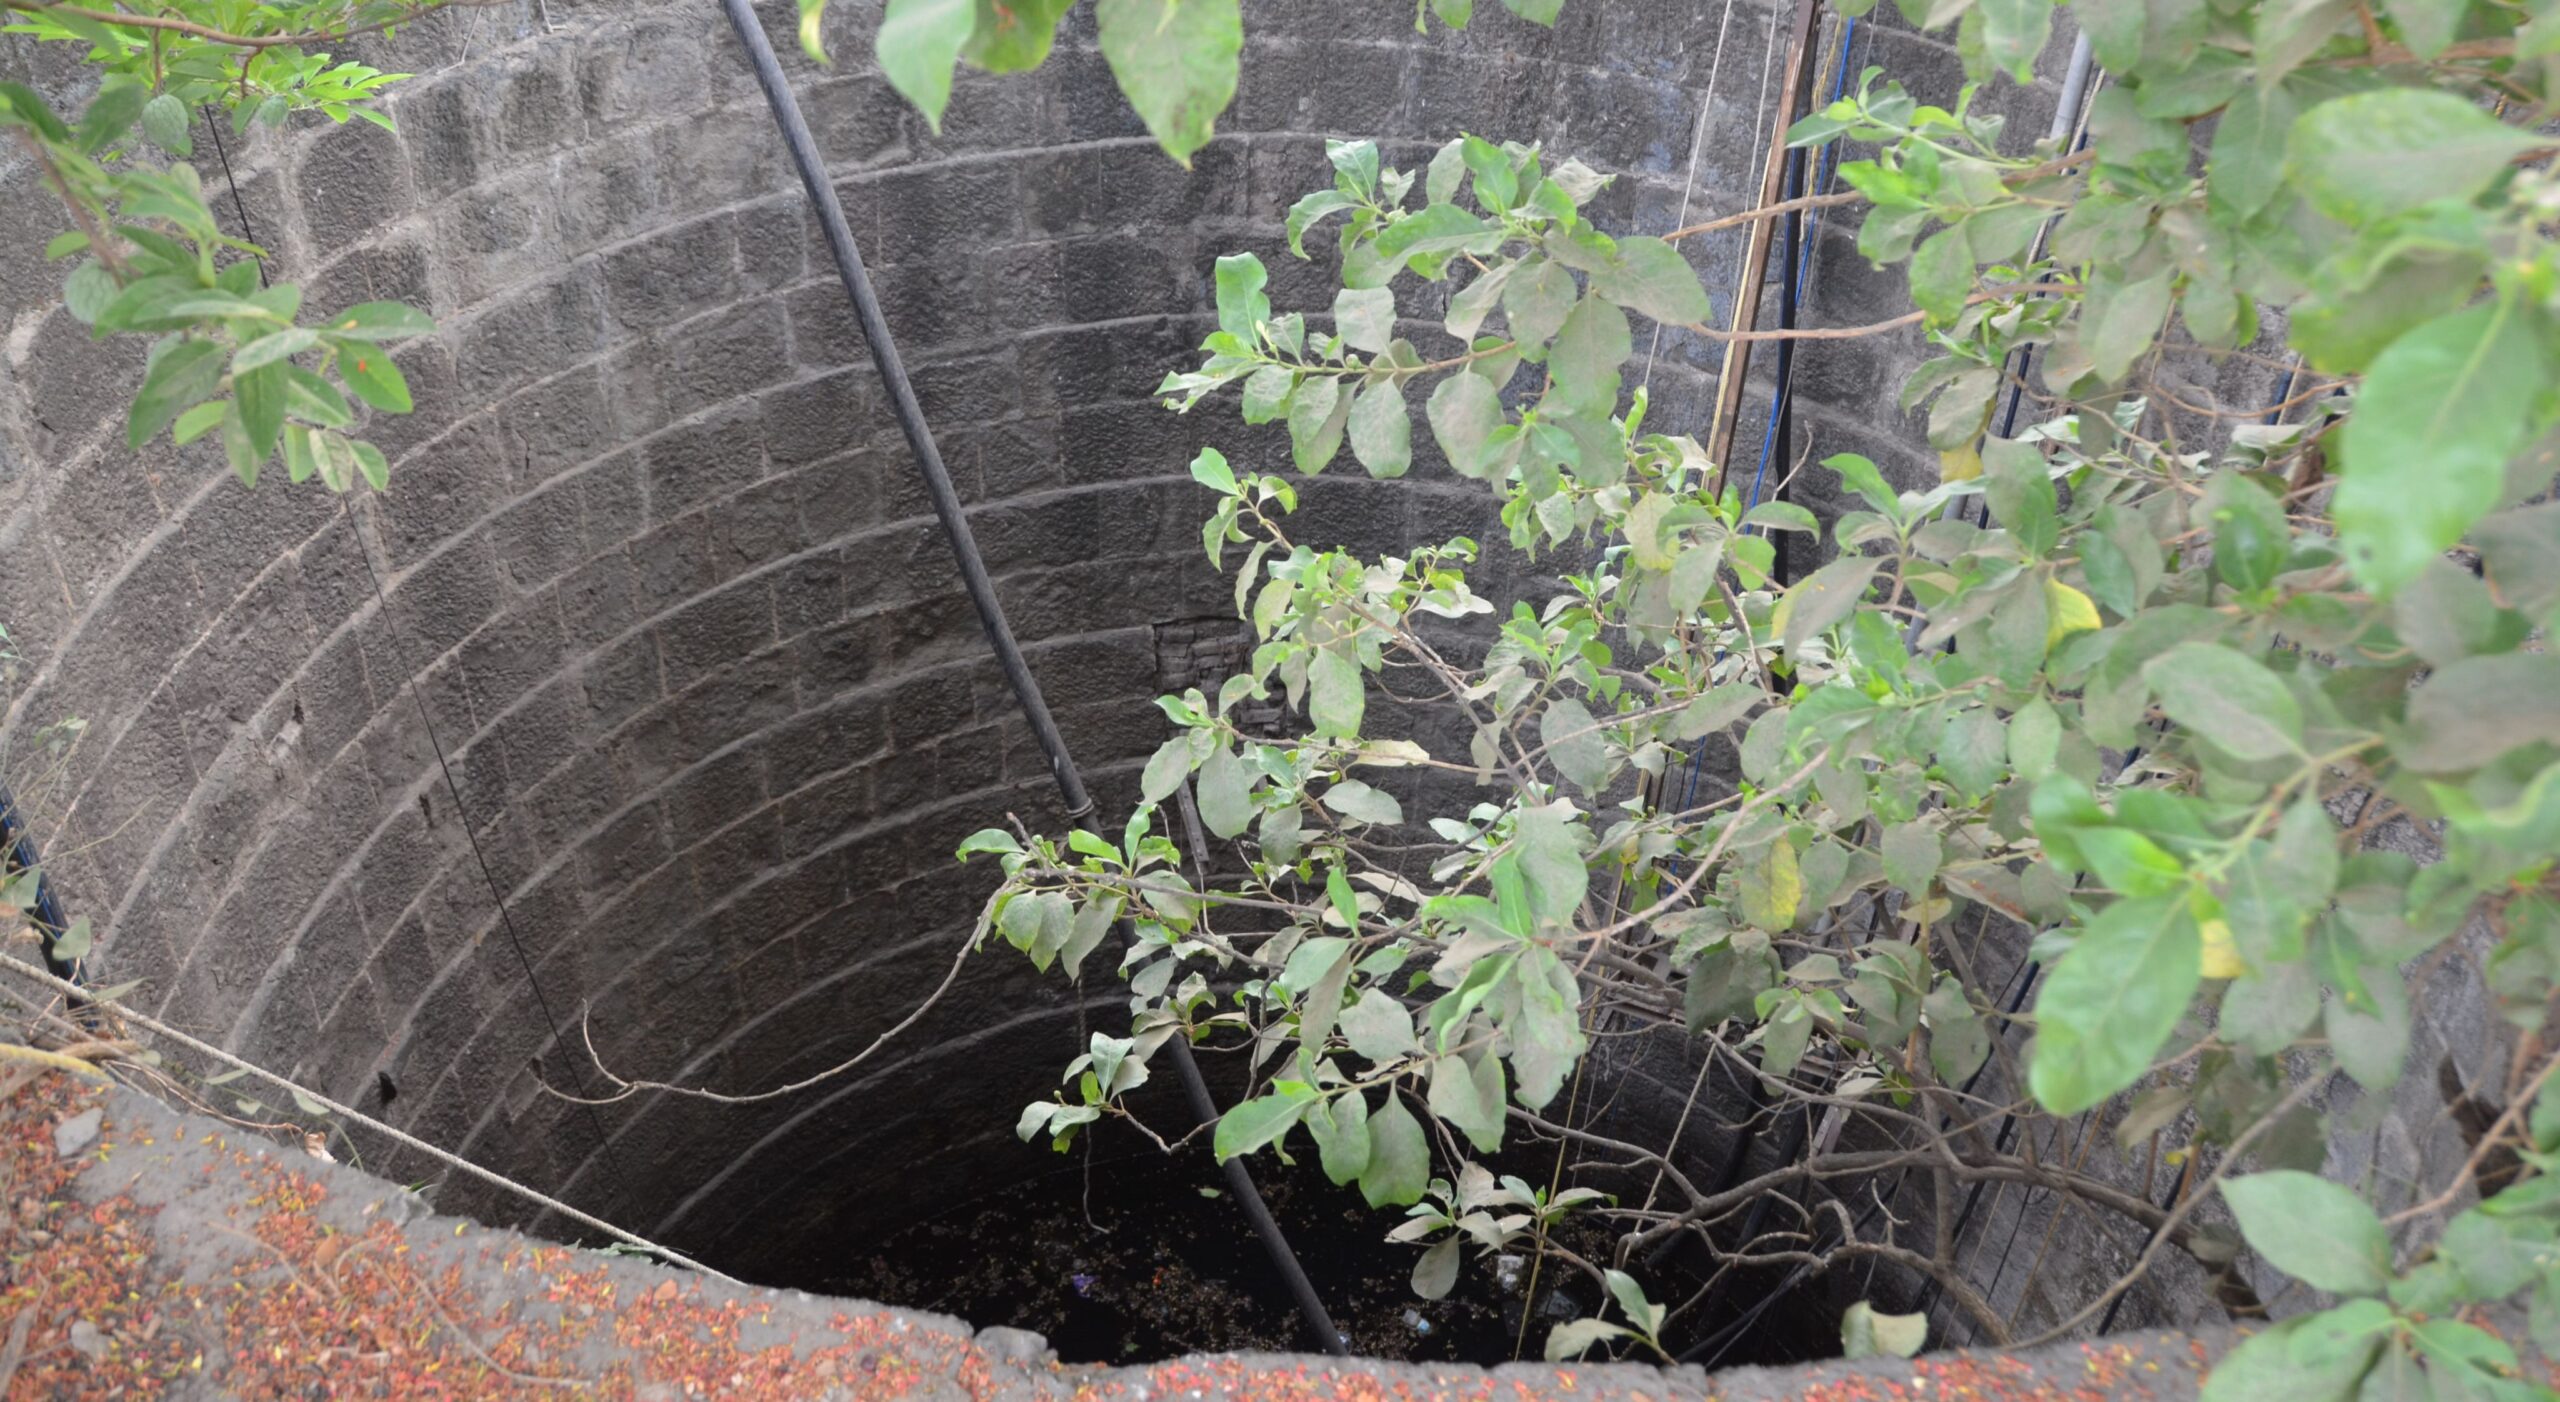 A well located in rural Maharashtra with notably depleted water levels